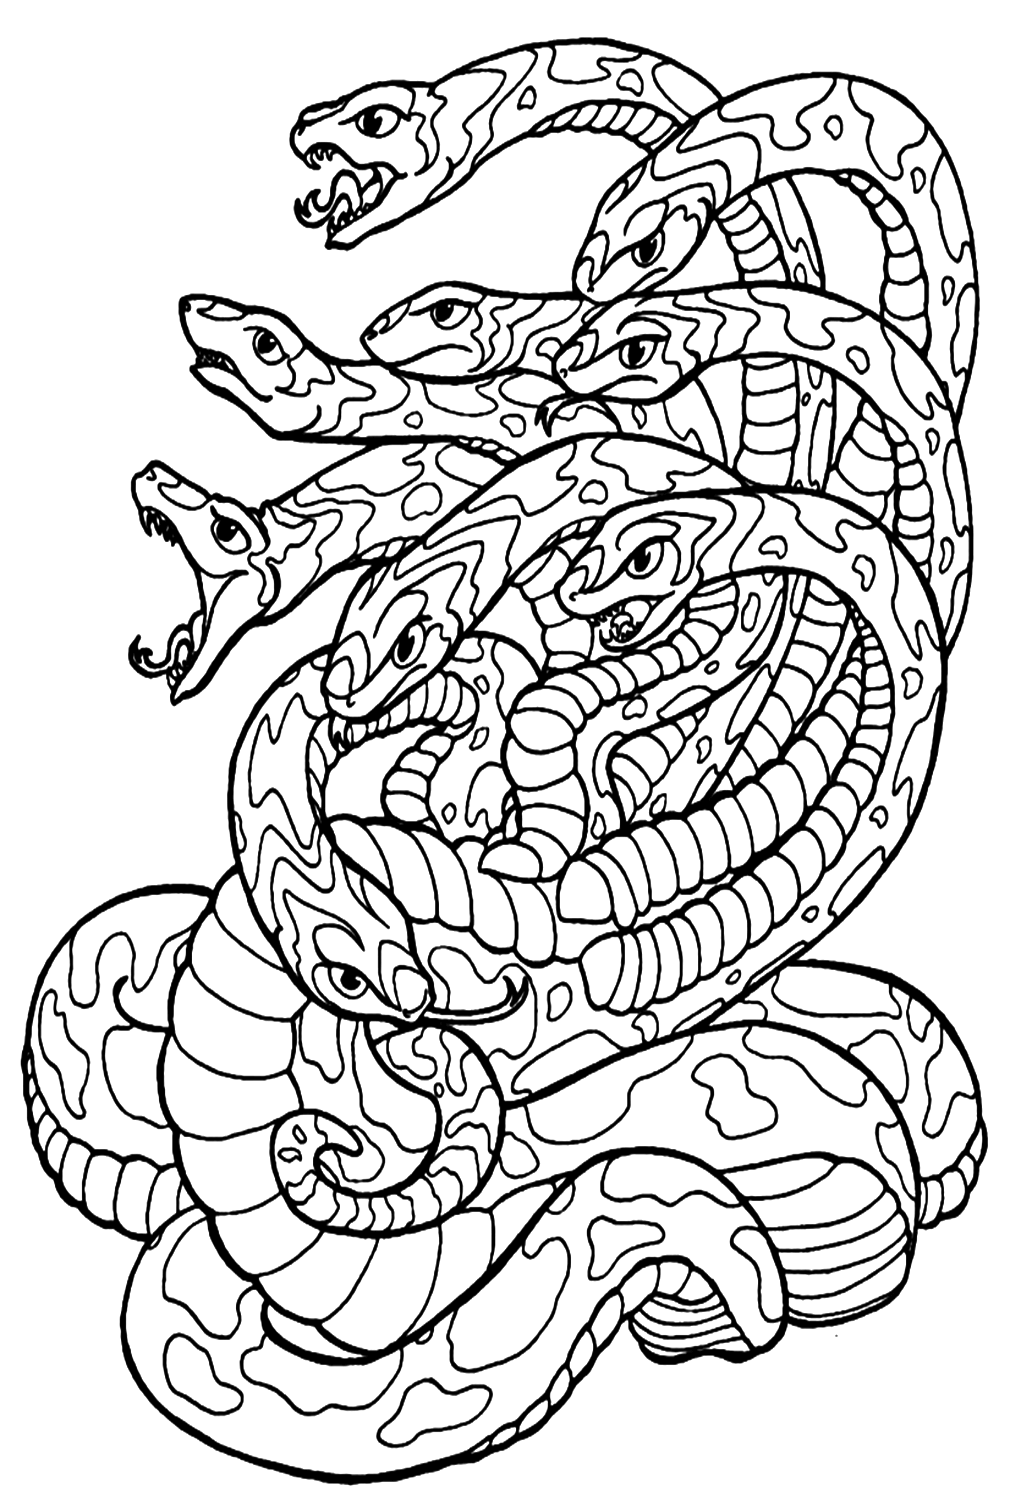 Hydra Coloring Page Coloring Page